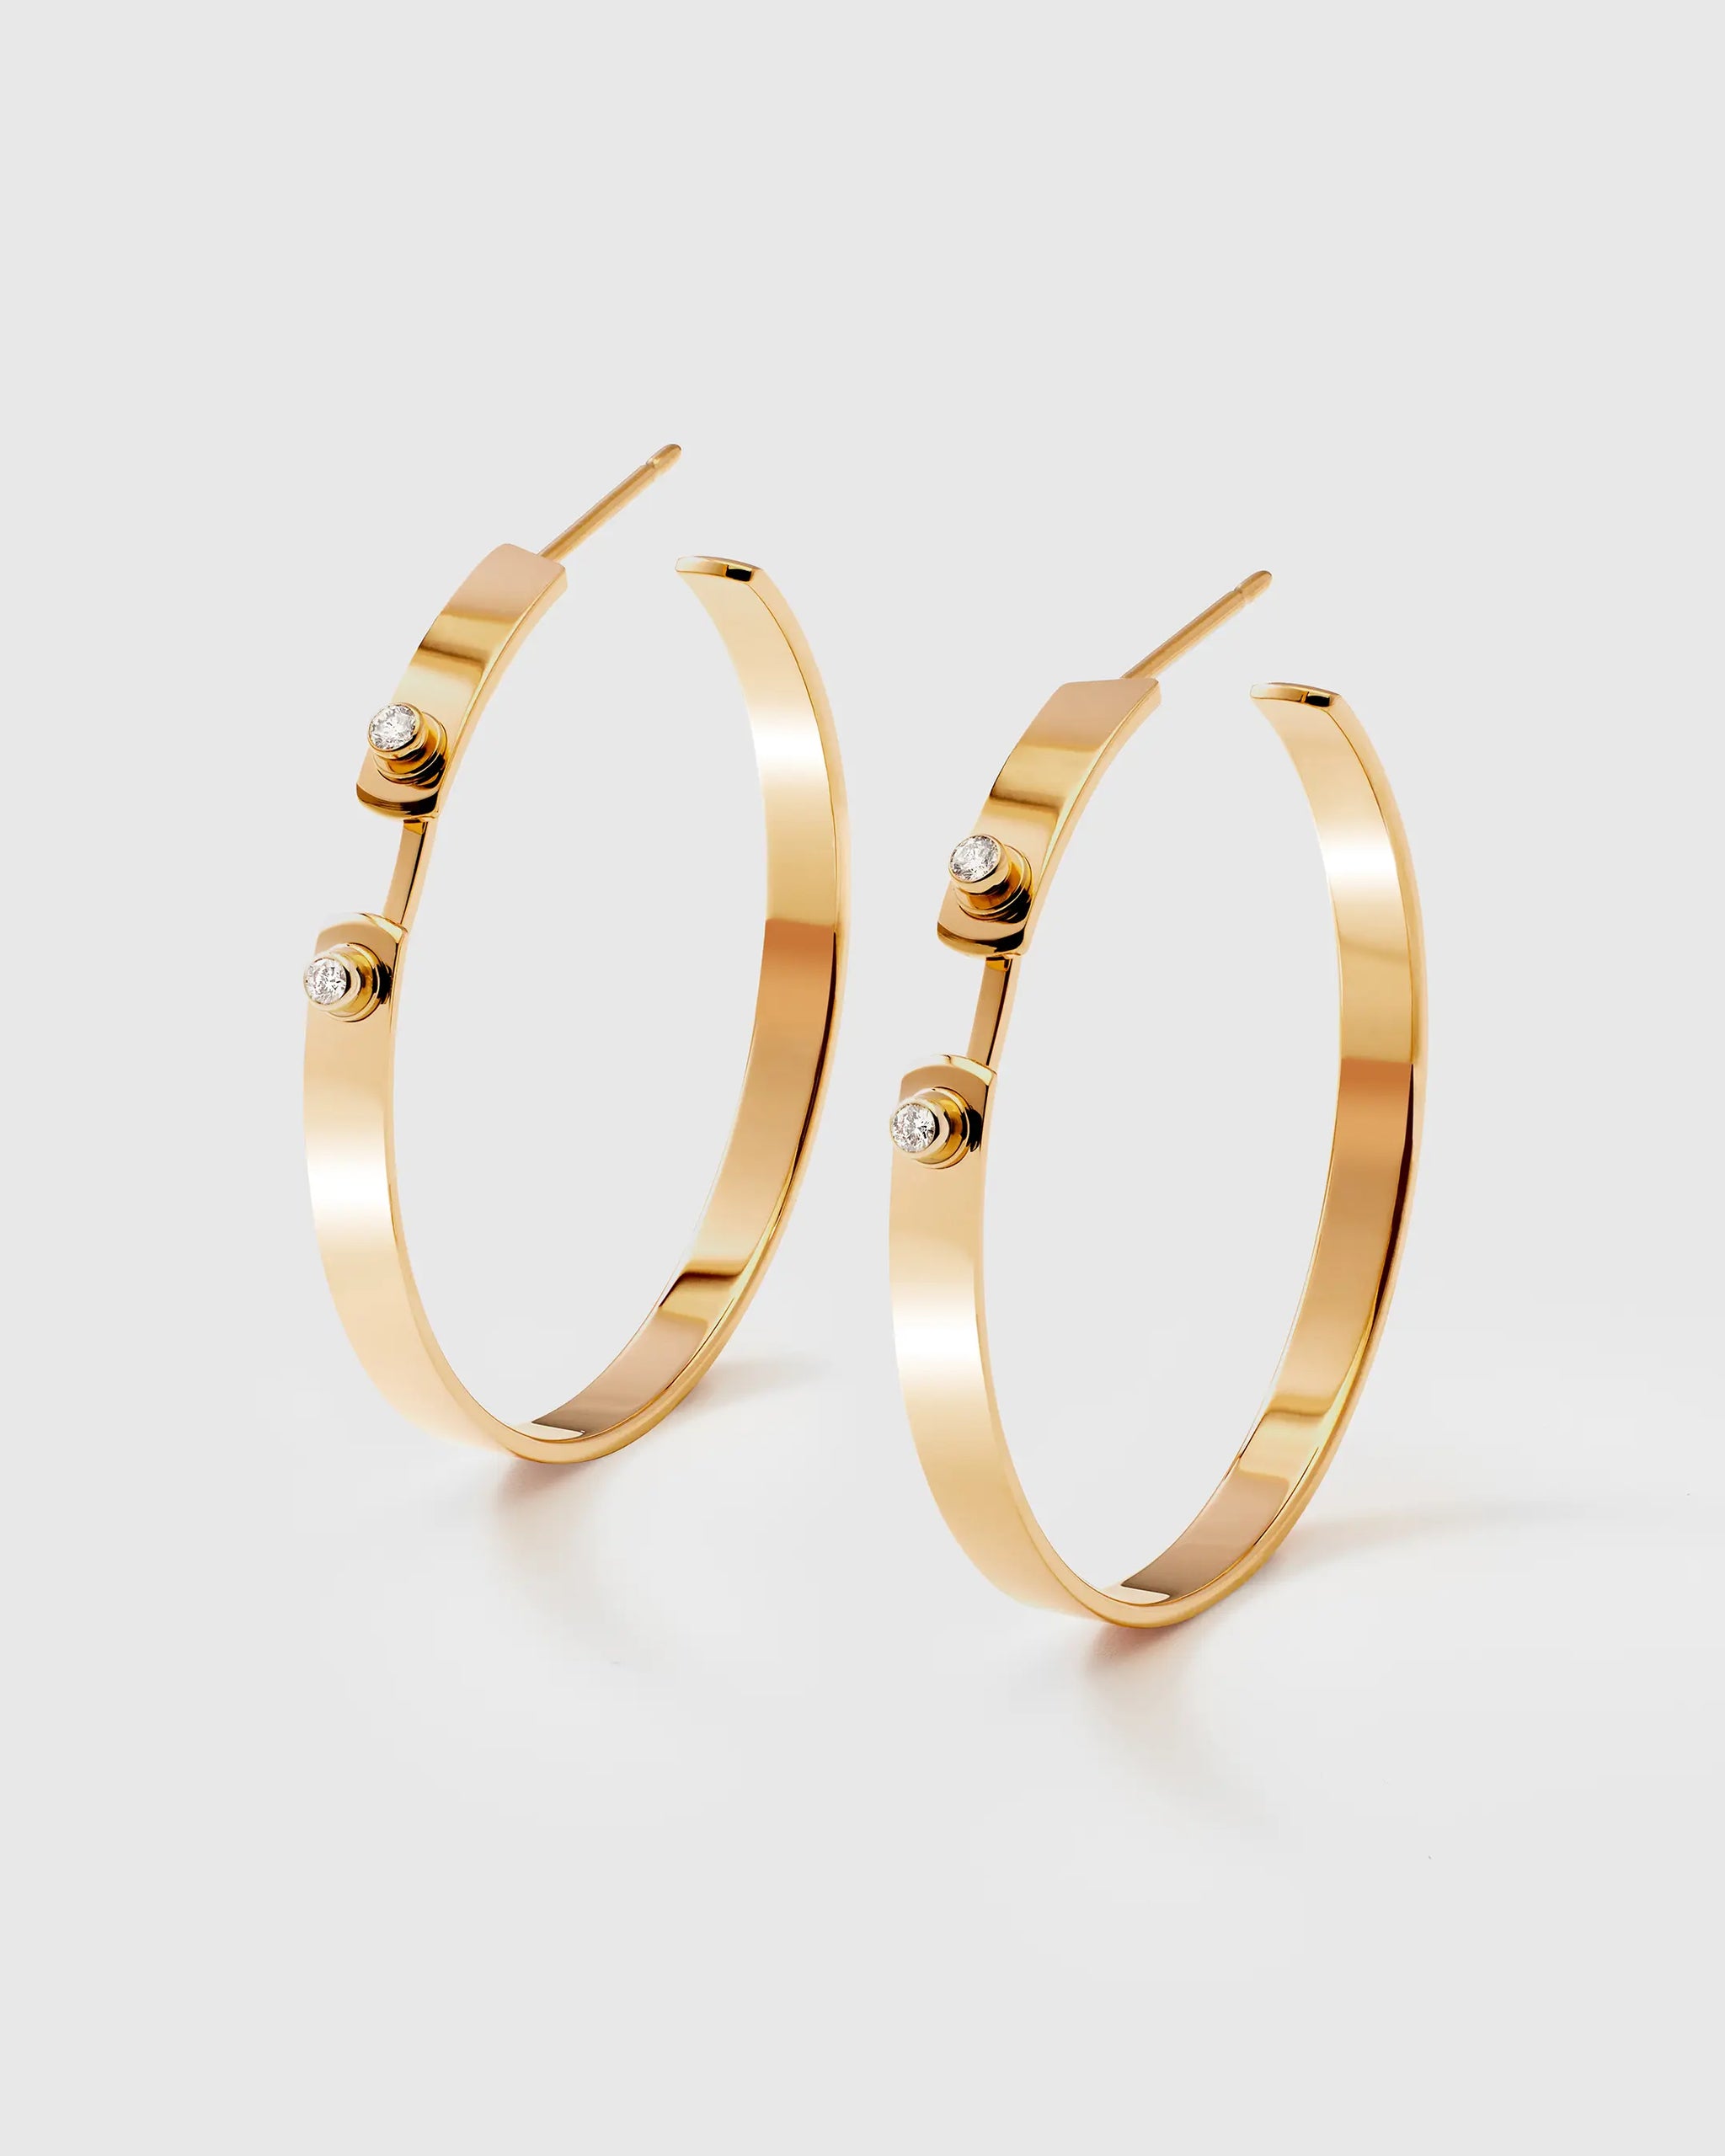 Monday Morning Mood Hoops in Yellow Gold - 1 - Nouvel Heritage